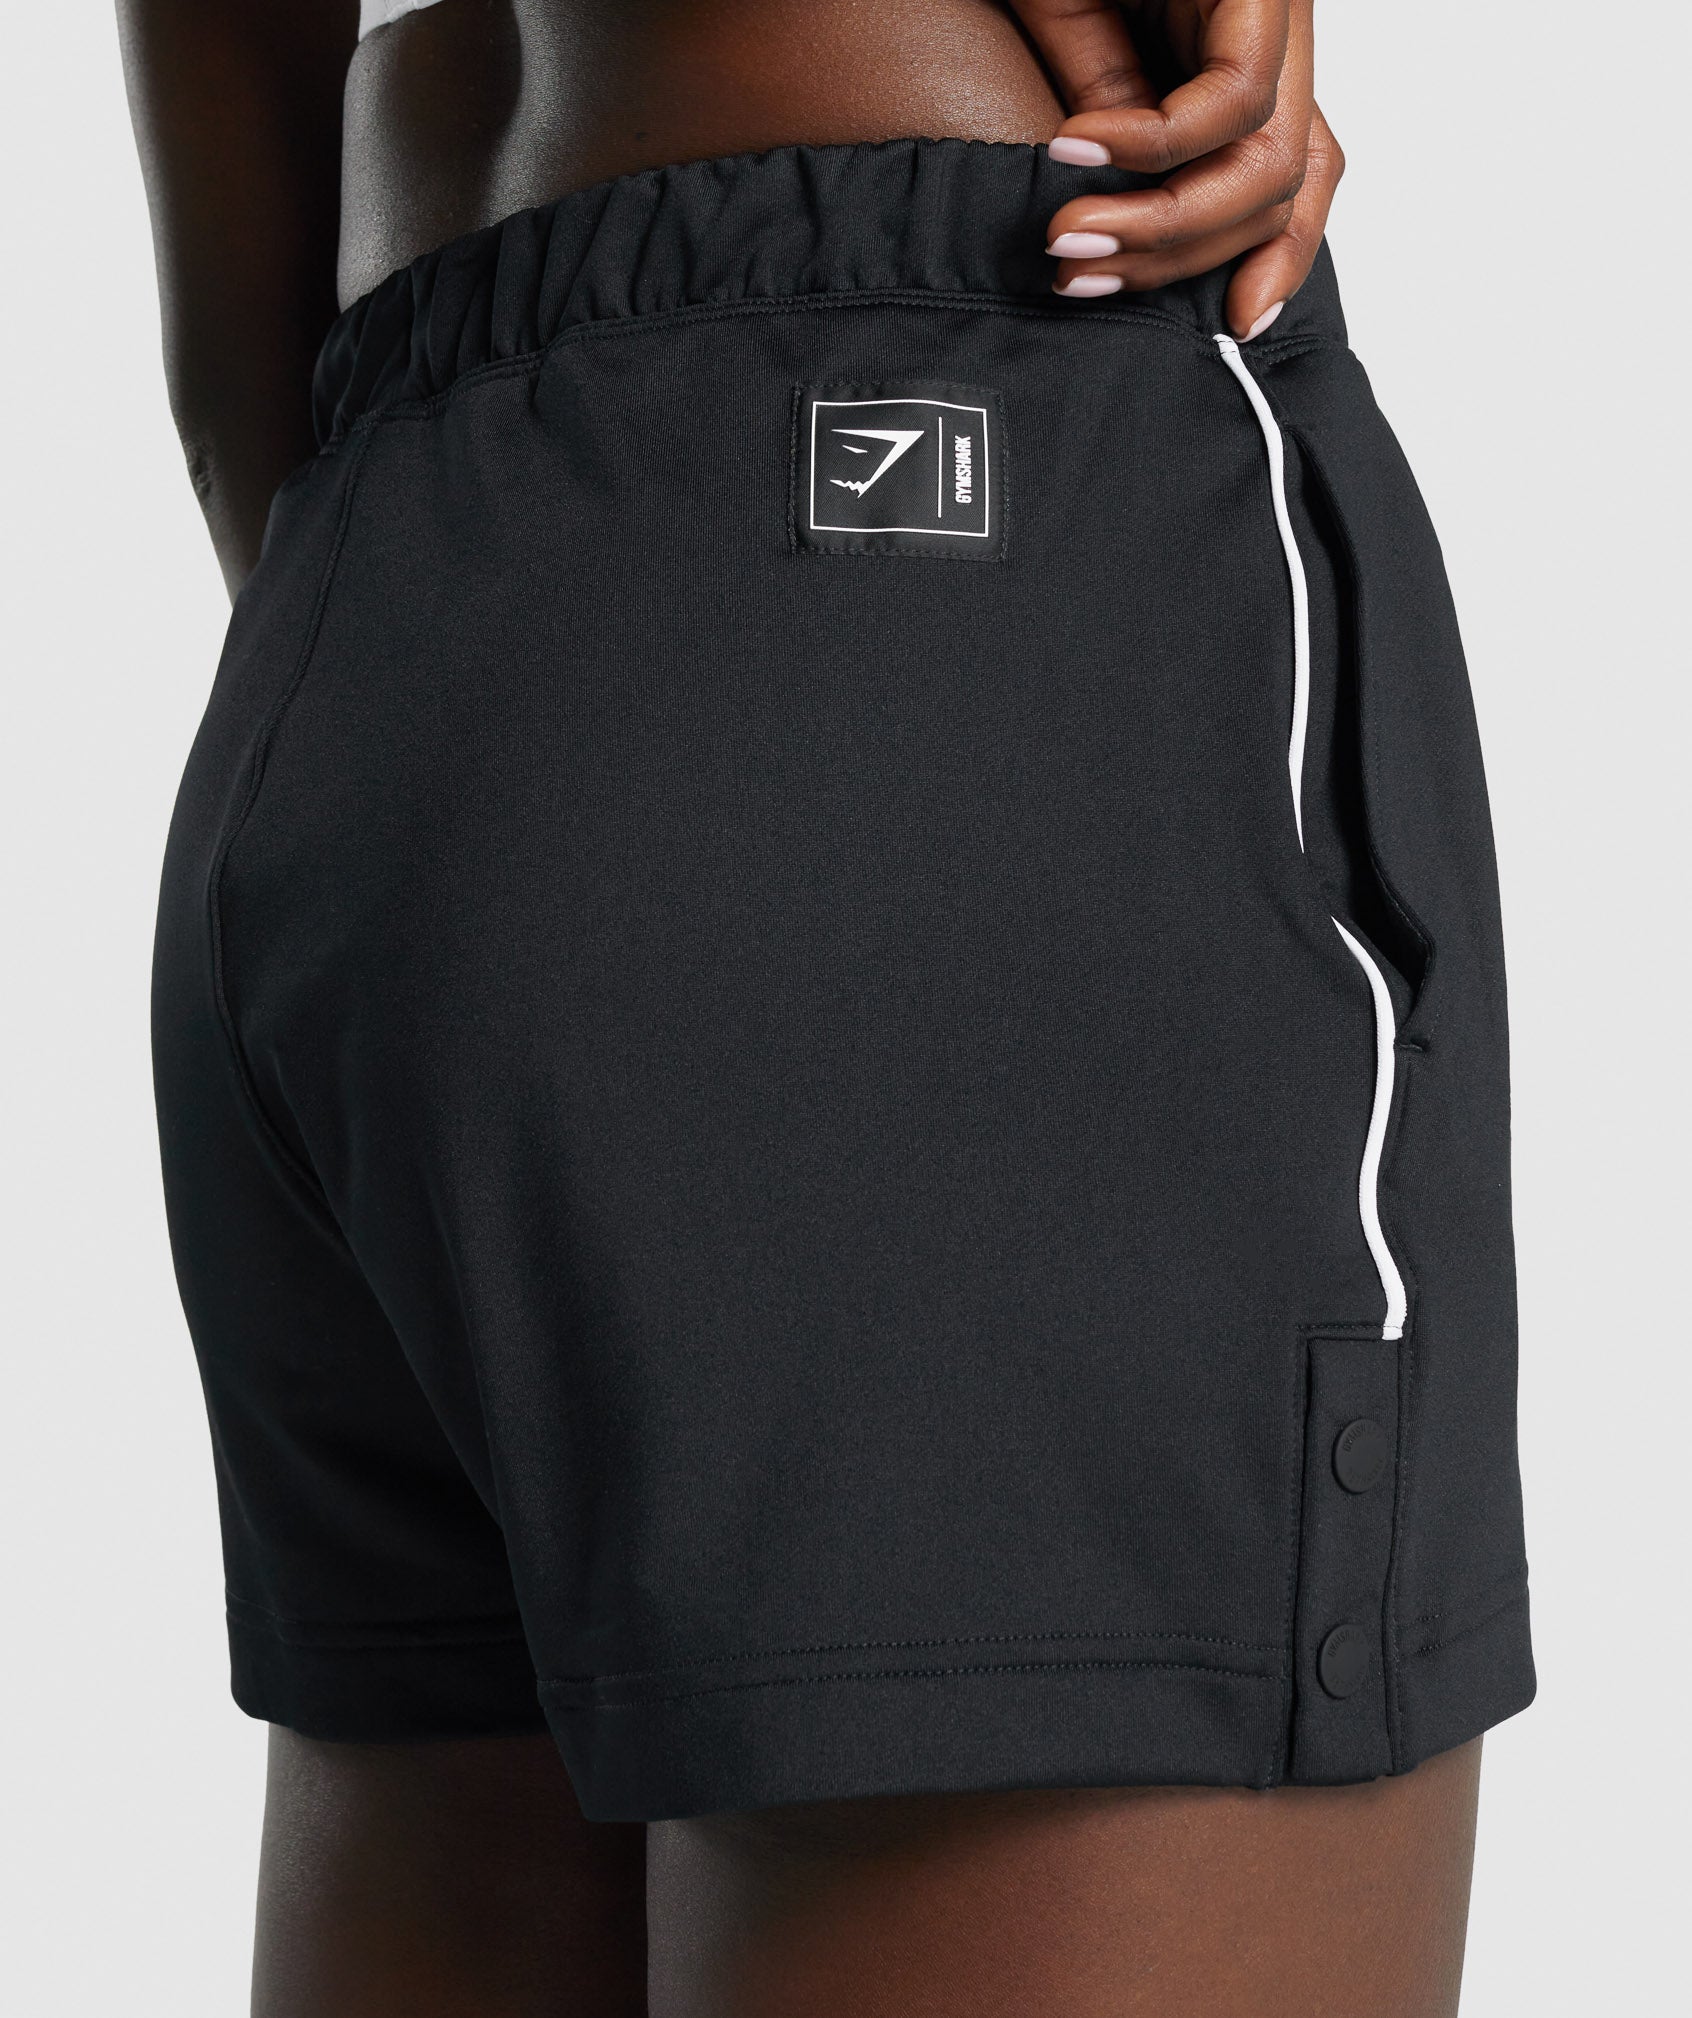 Recess Shorts in Black - view 6